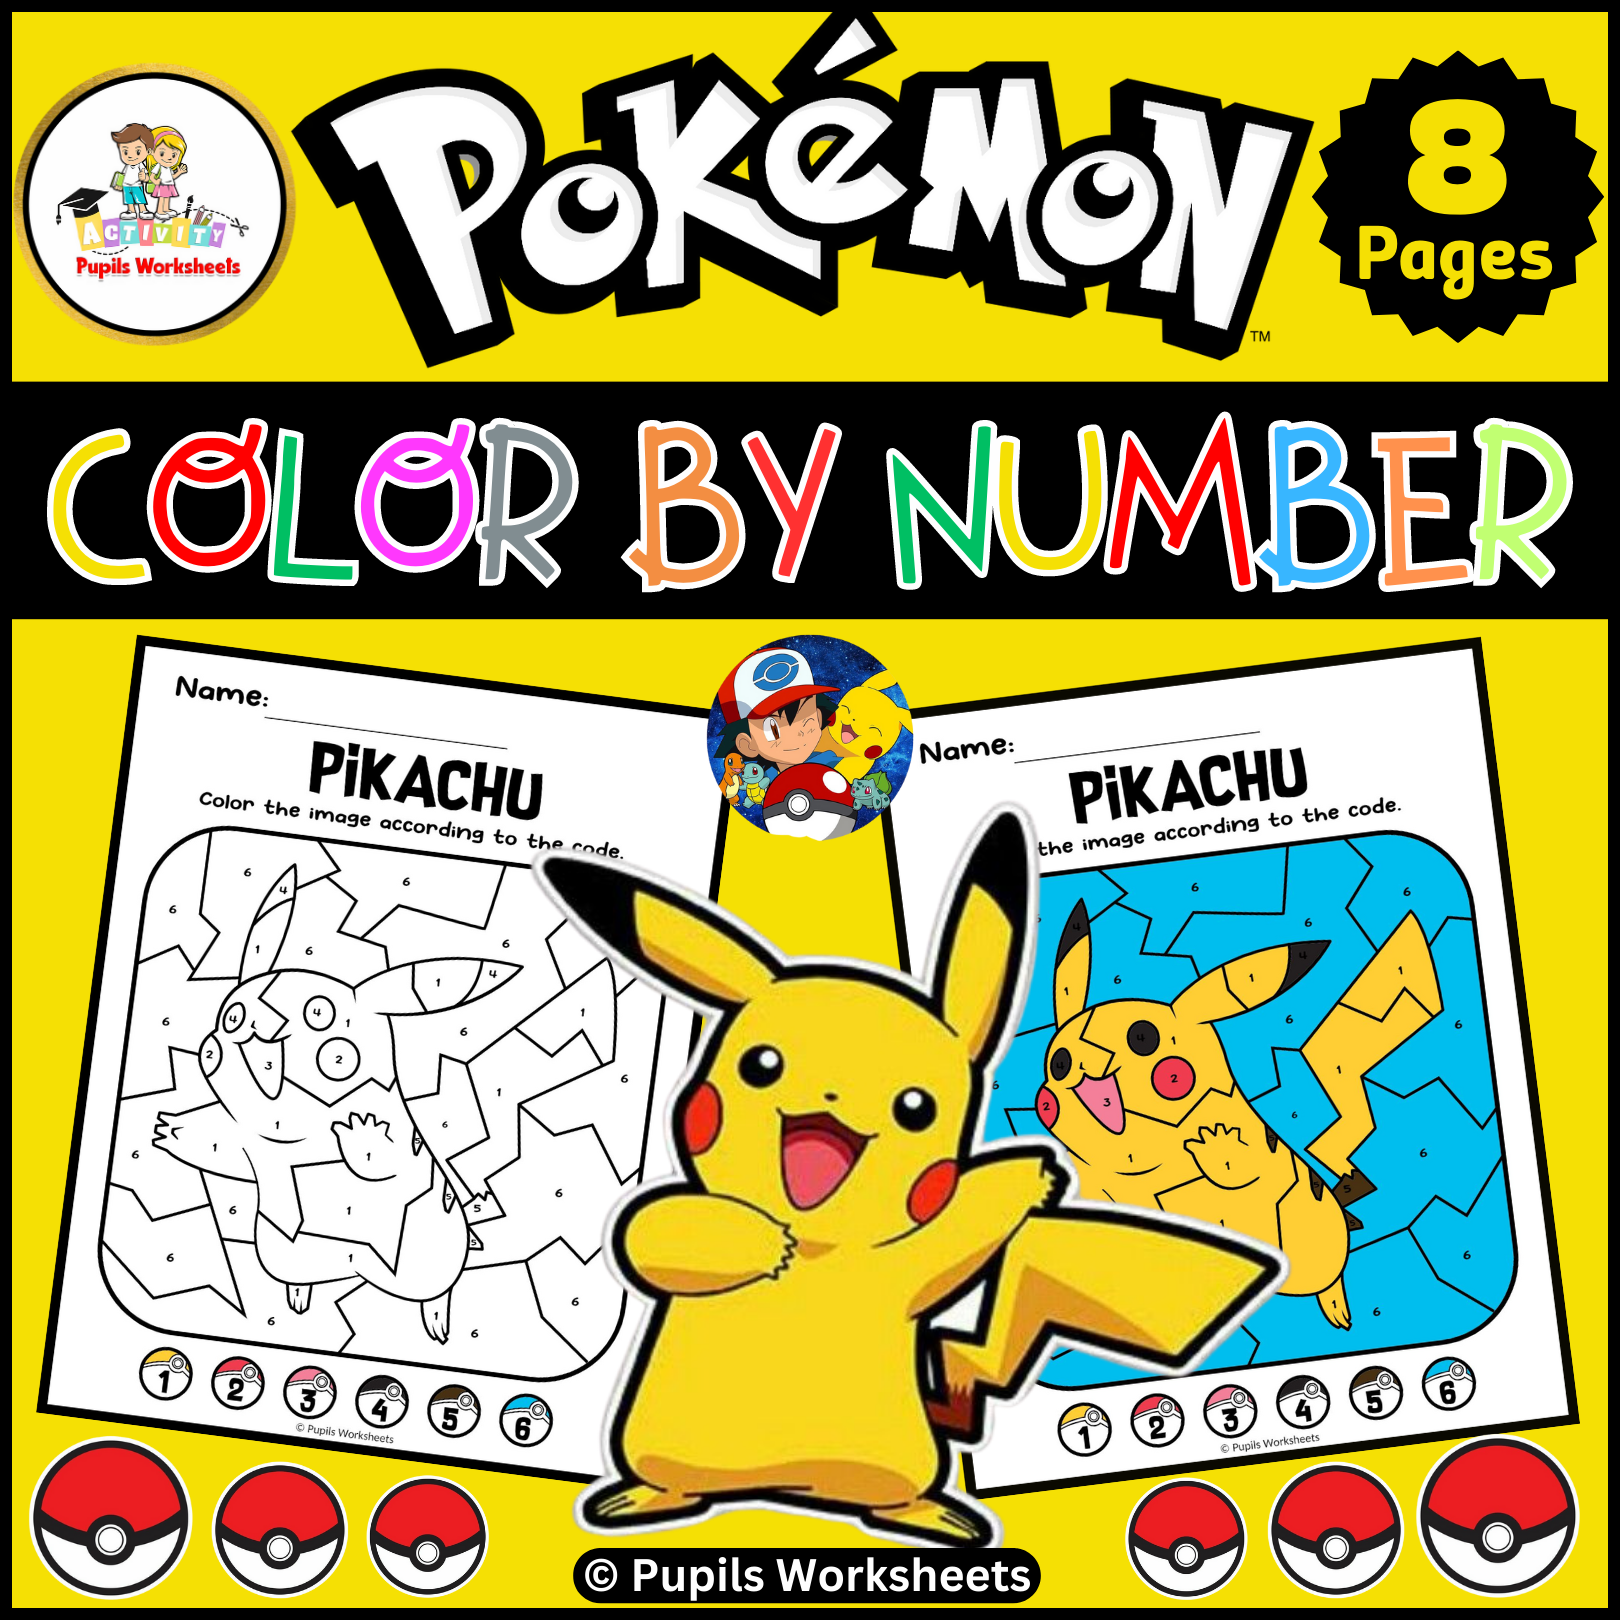 Pokemon color by number